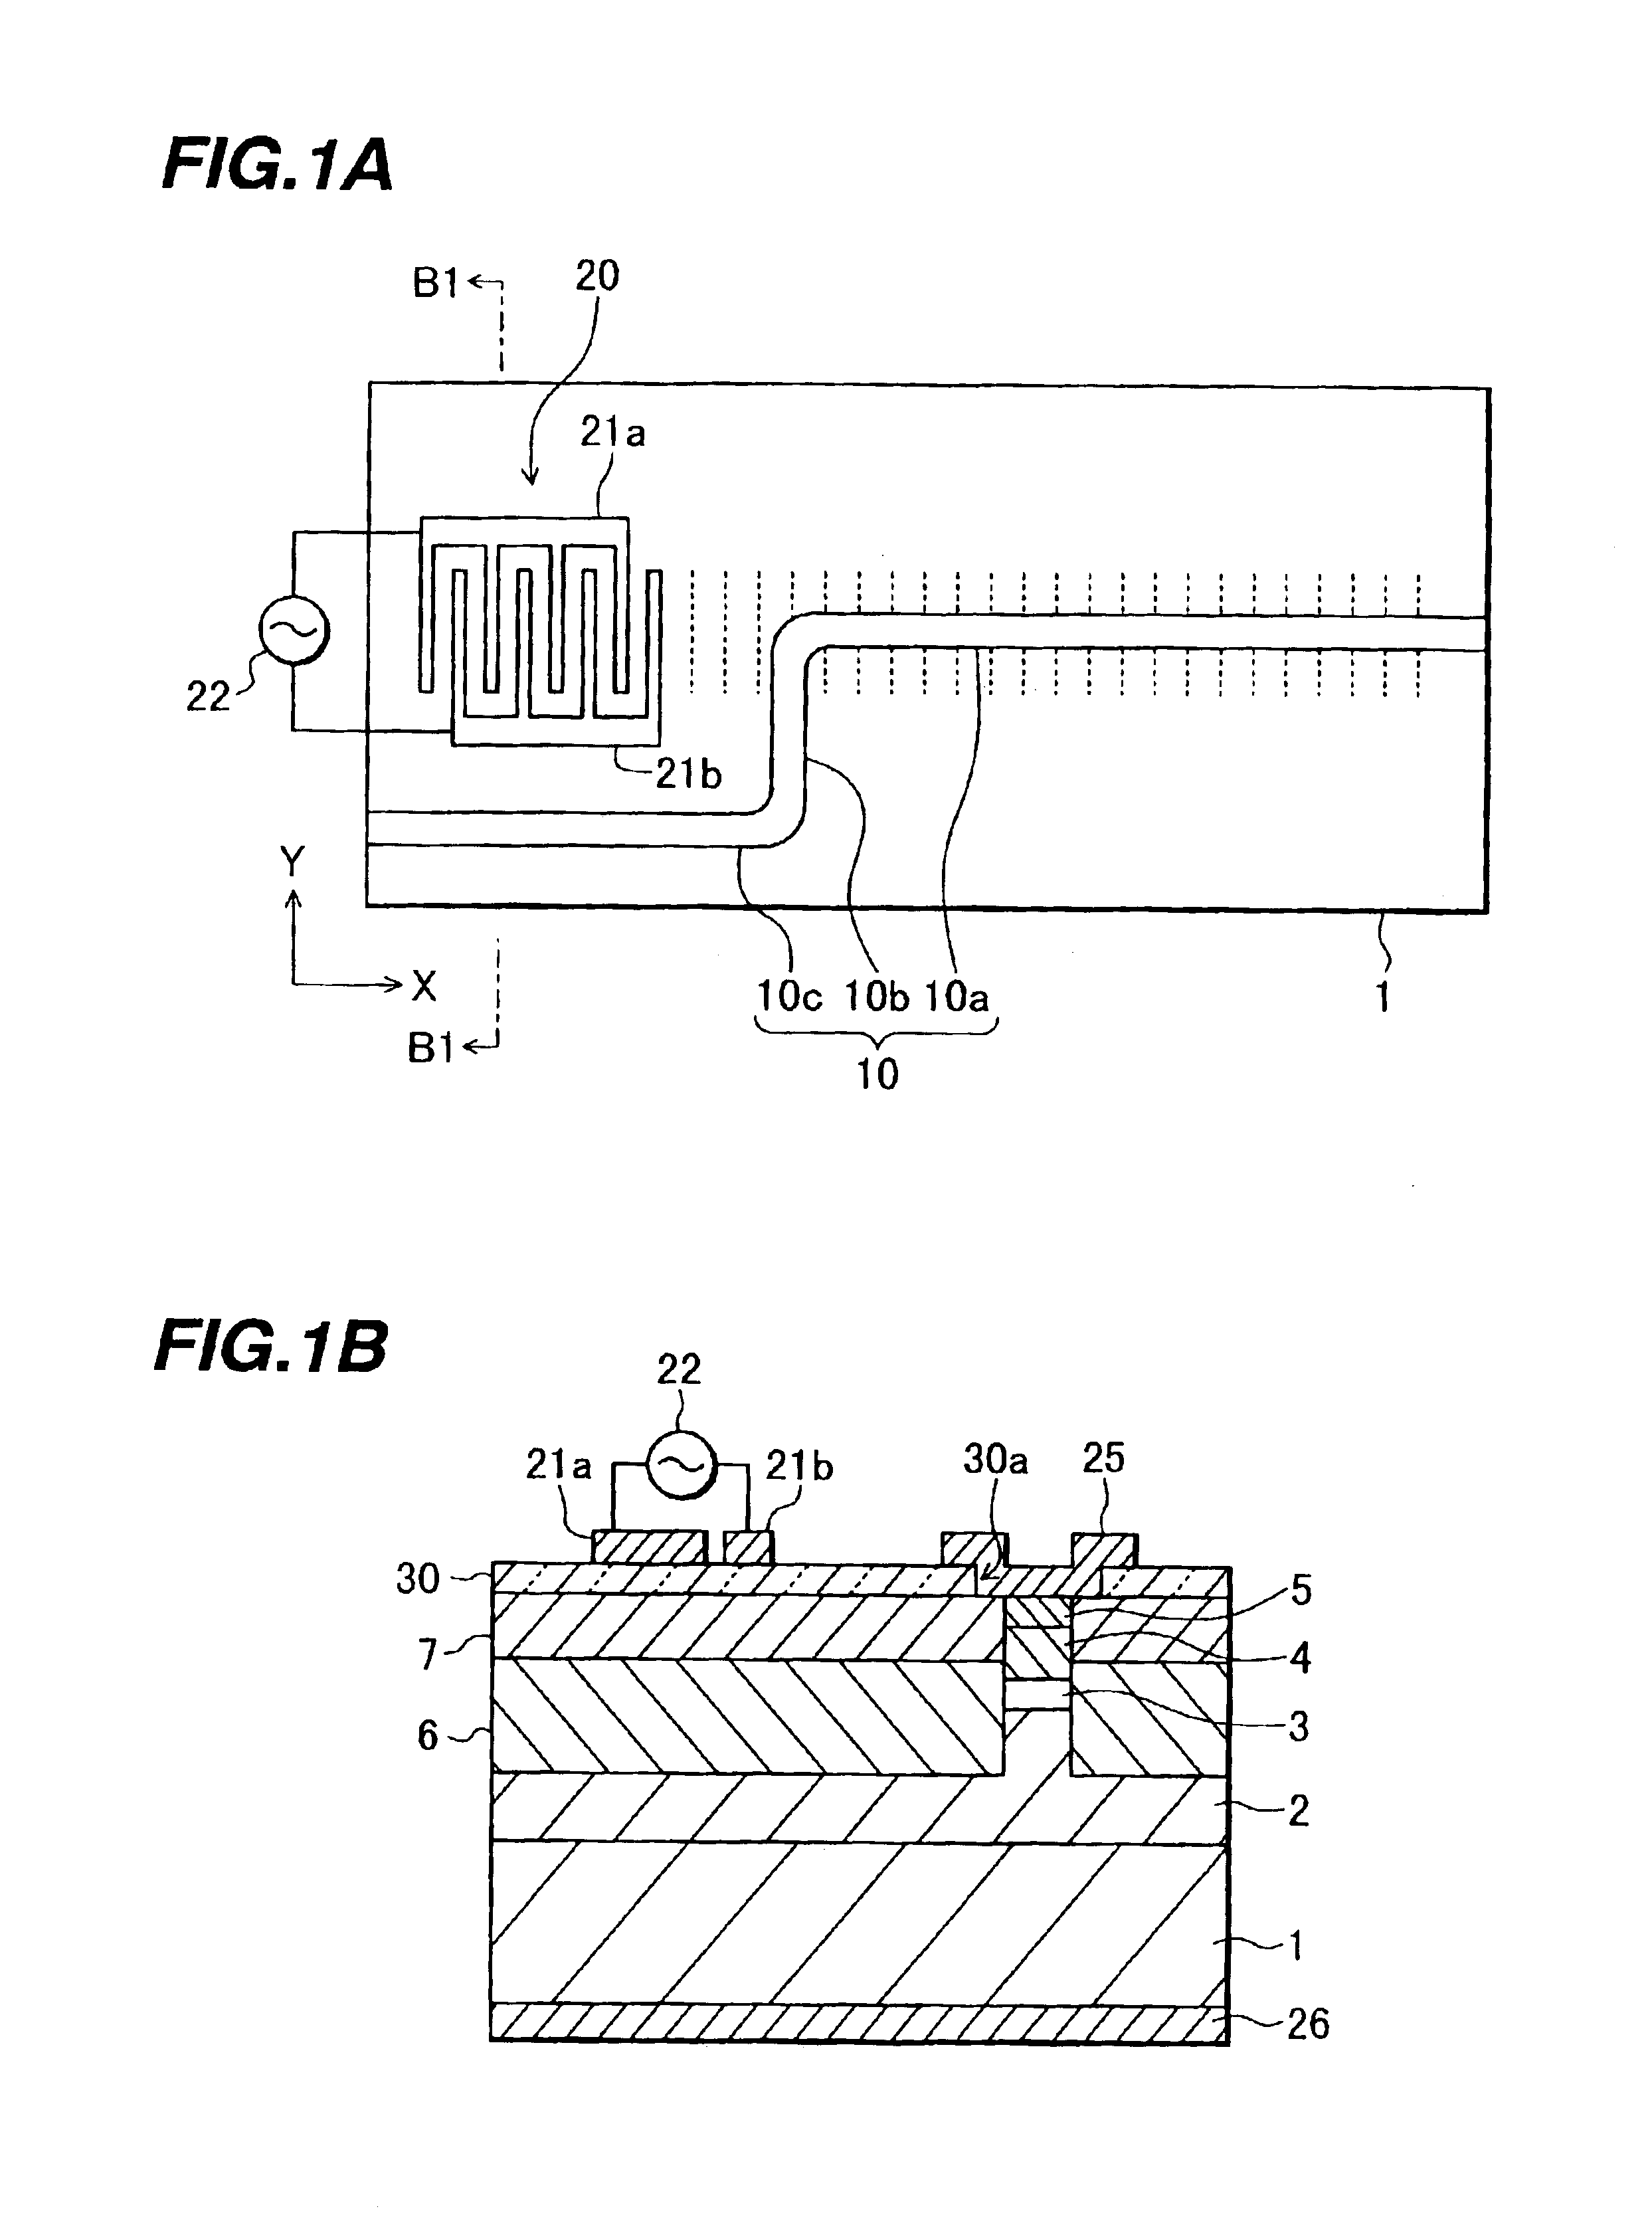 Wavelength controllable optical device and light control method